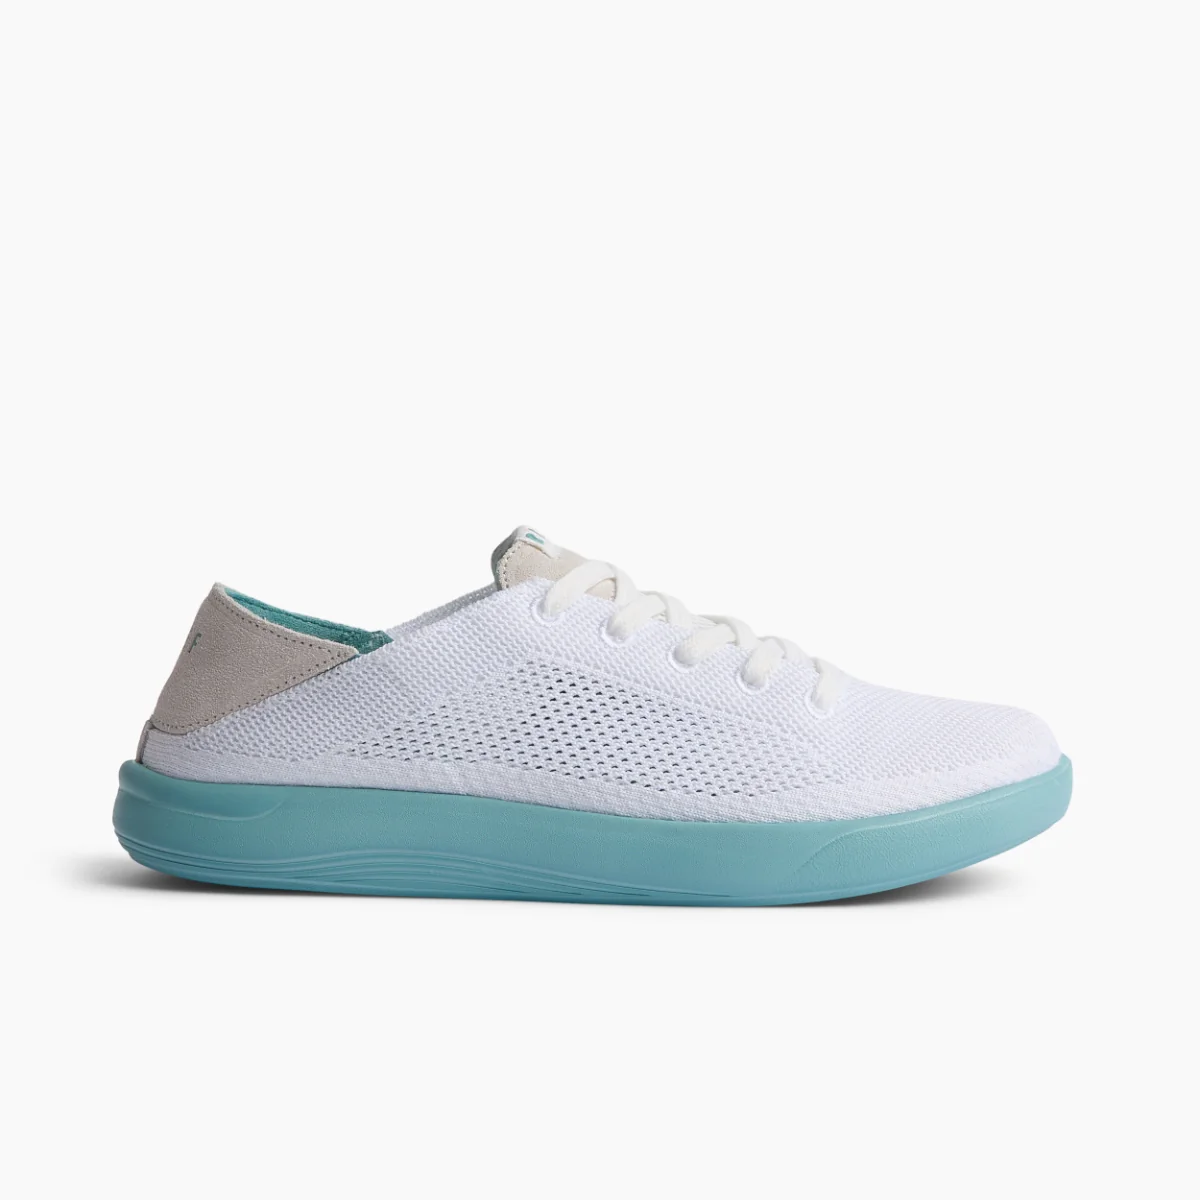 REEF slip on comfort sneakers in white and light blue side view (Swellsole Neptune)